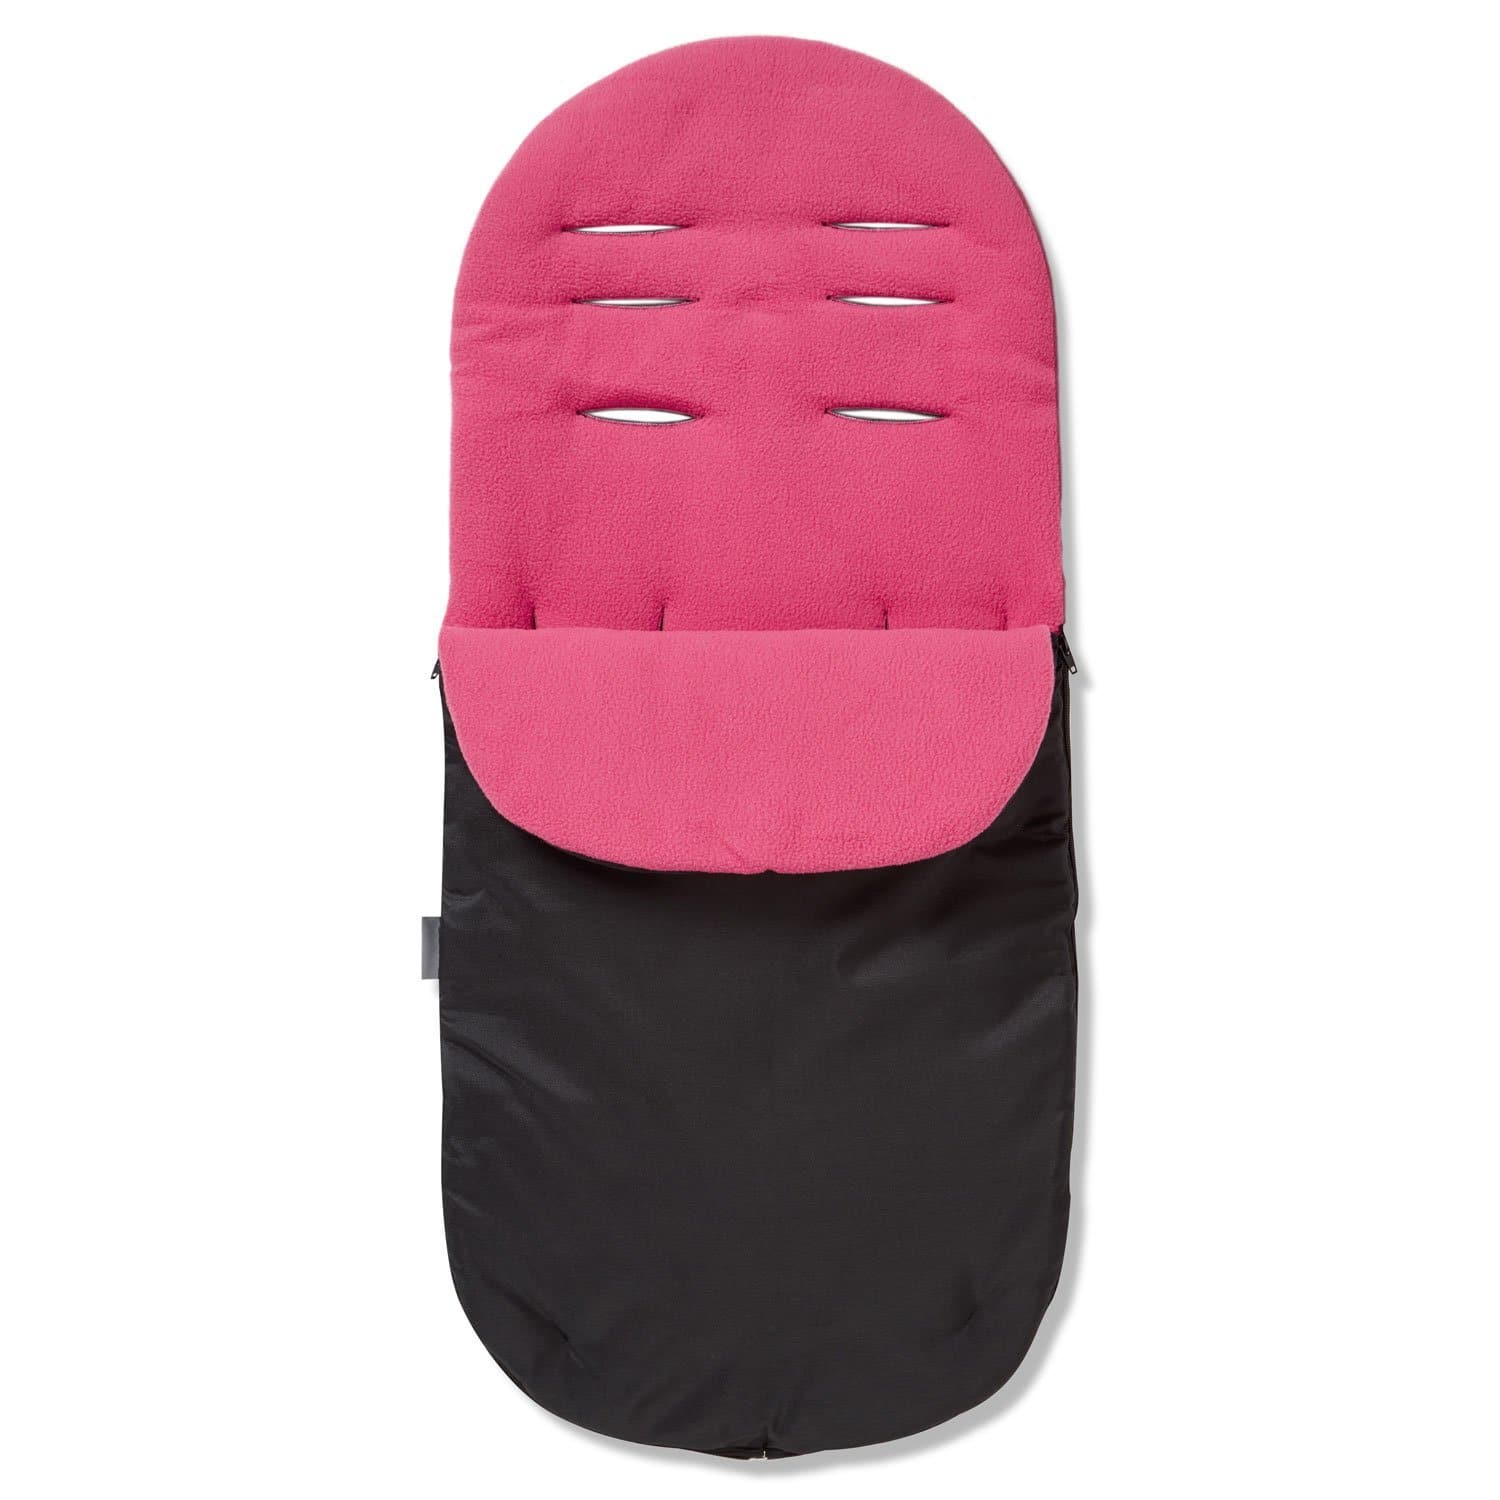 Footmuff / Cosy Toes Compatible with Safety 1st - Dark Pink / Fits All Models | For Your Little One